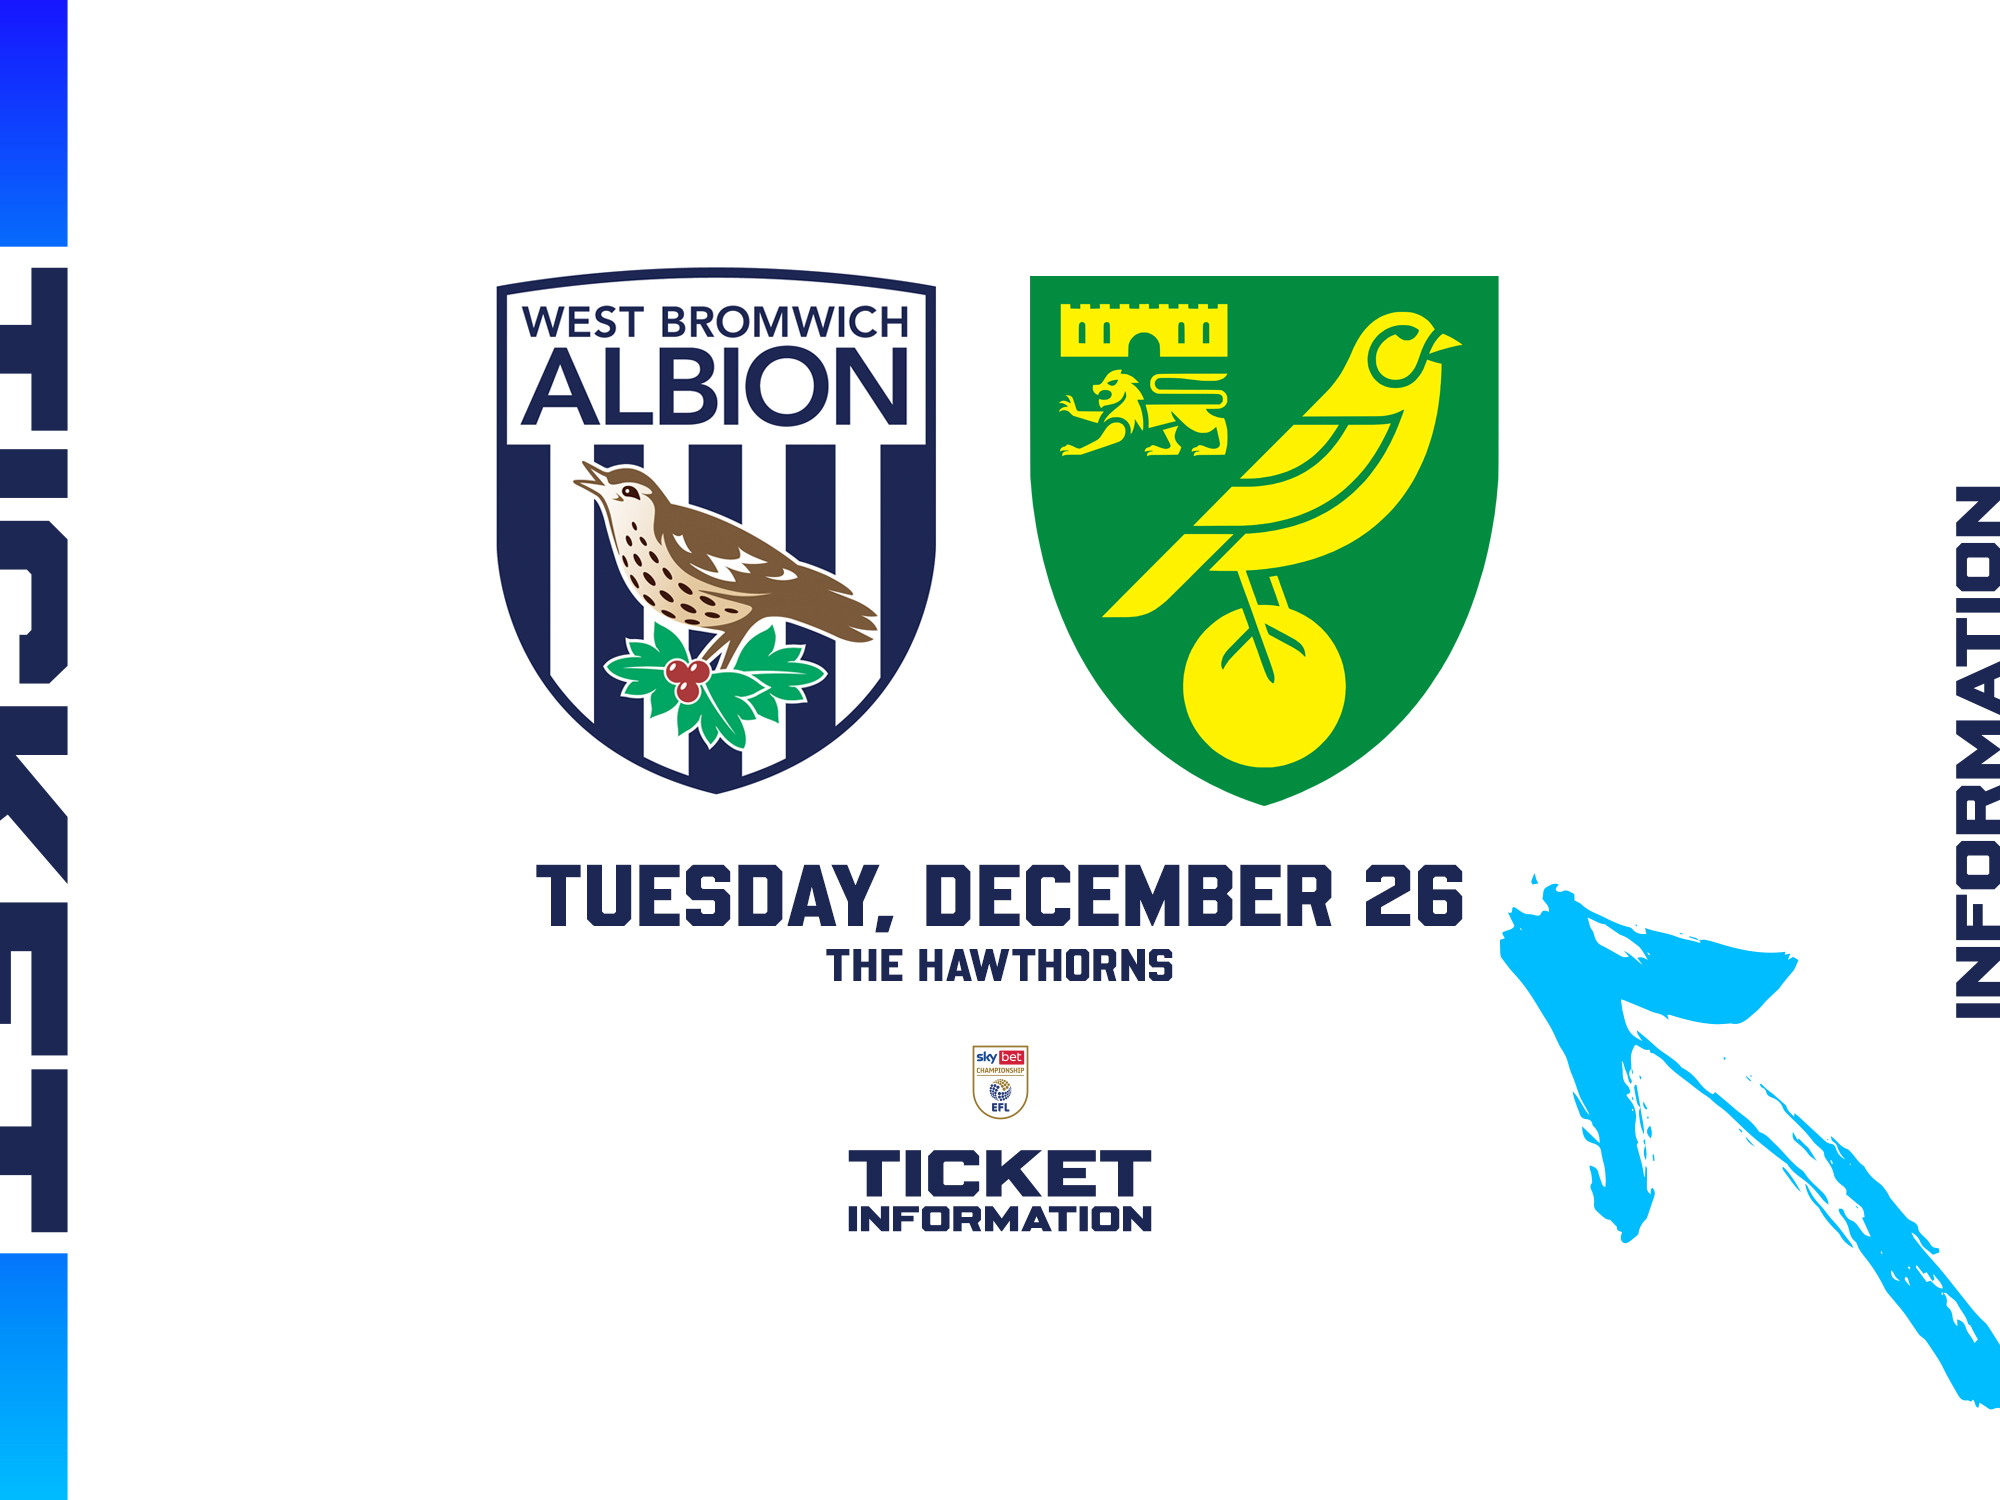 A ticket graphic displaying information for Albion's game against Norwich